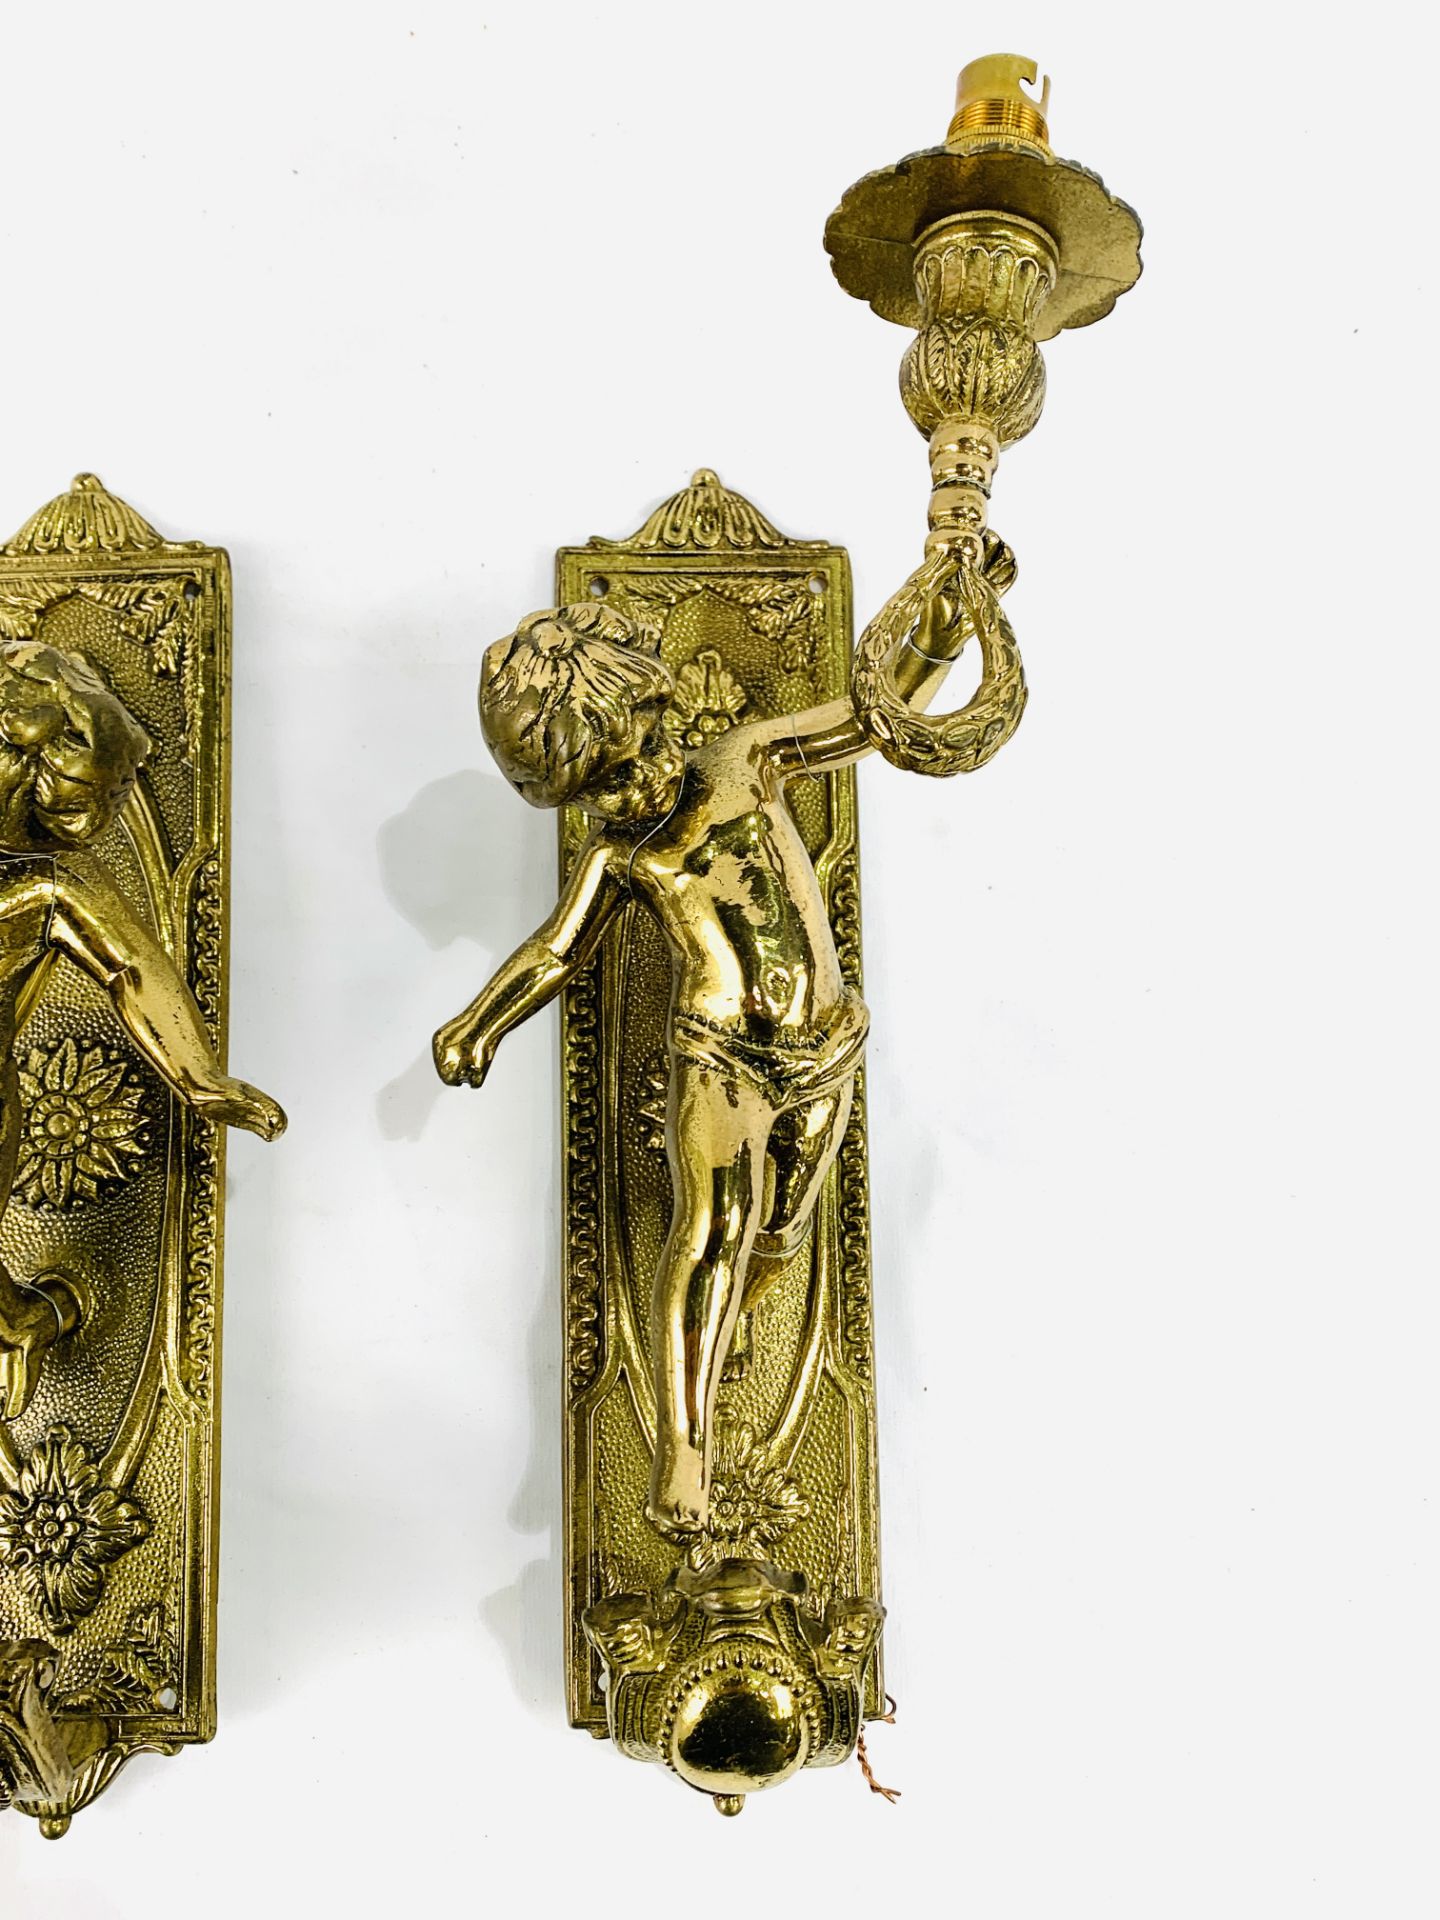 Pair of solid brass electric cherubic wall sconces complete with wooden mounts - Image 2 of 2